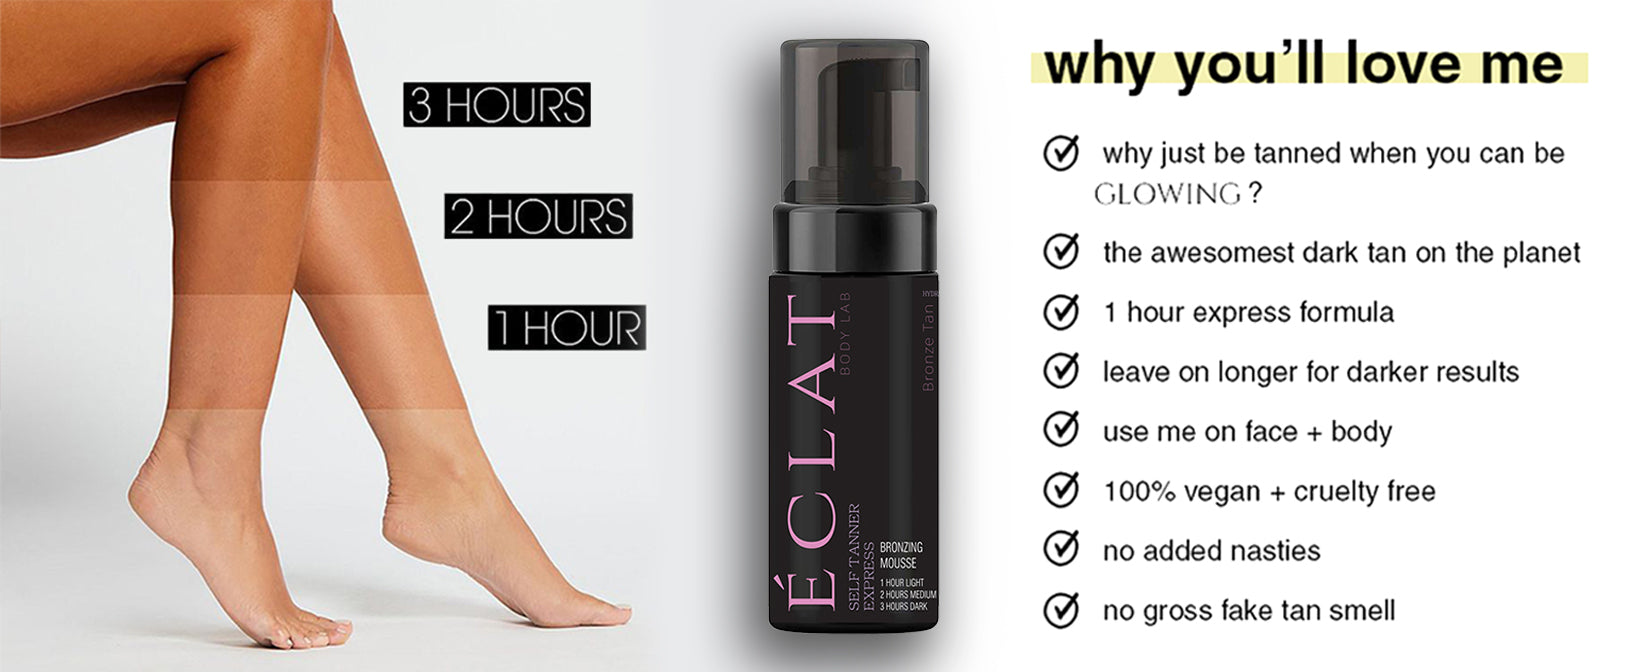 Eclat Self Tanning Mousse Self tanner for tanning at home without sun Best tanner in the world